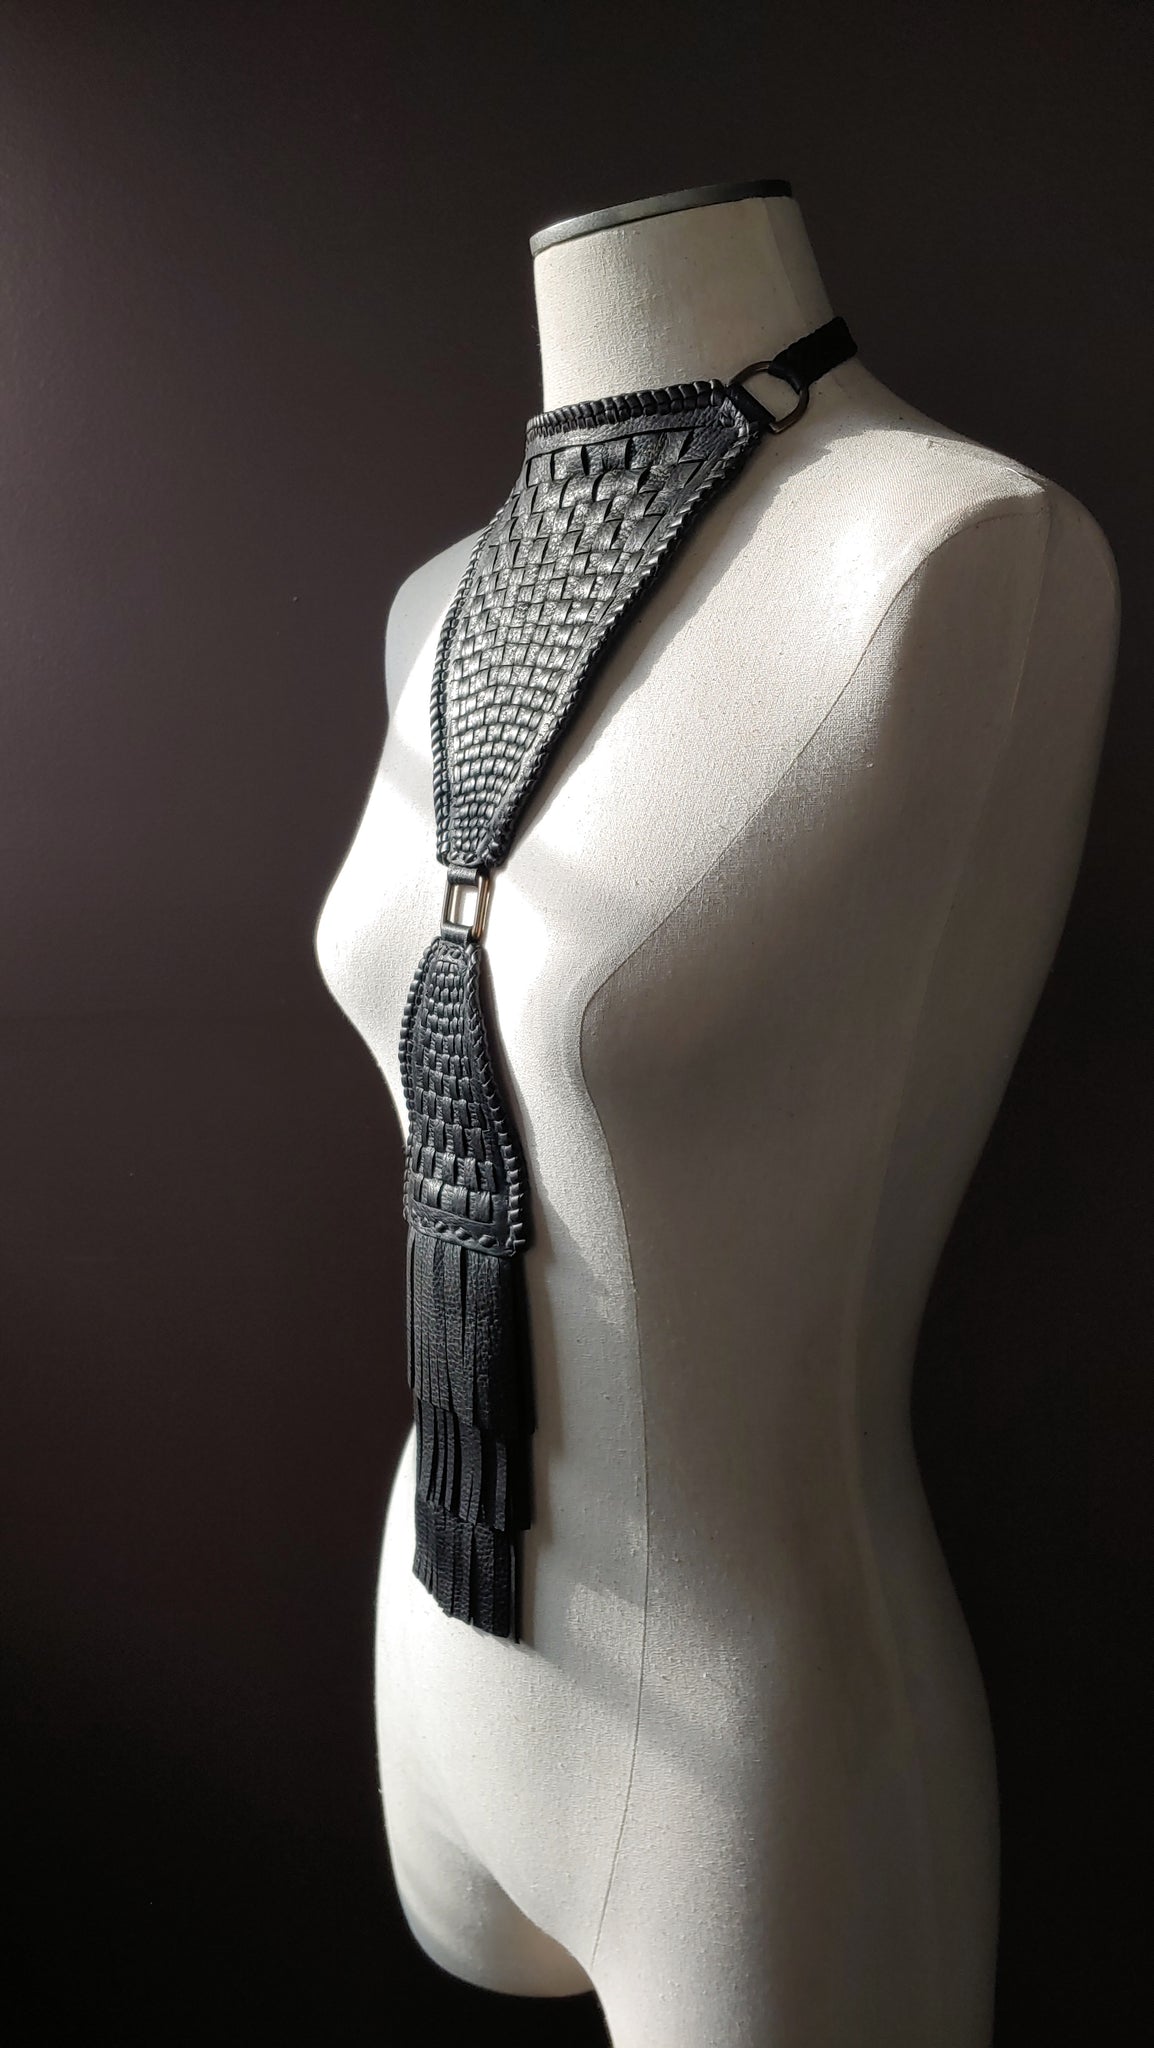 African inspired leather neckpiece, Black Deerskin, Woven Leather with Braided Ties and Fringe Tassels